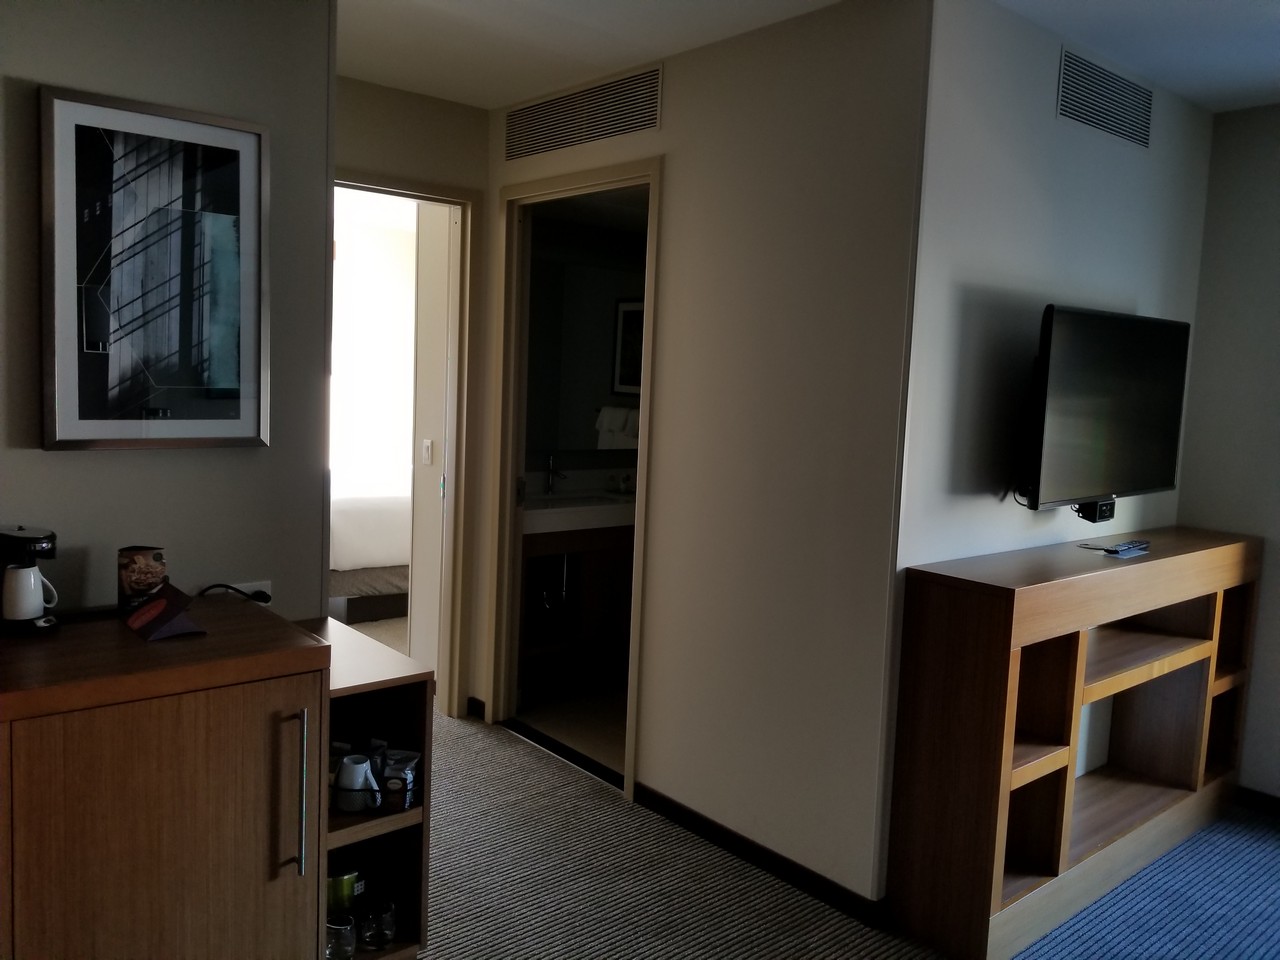 a room with a tv and shelves